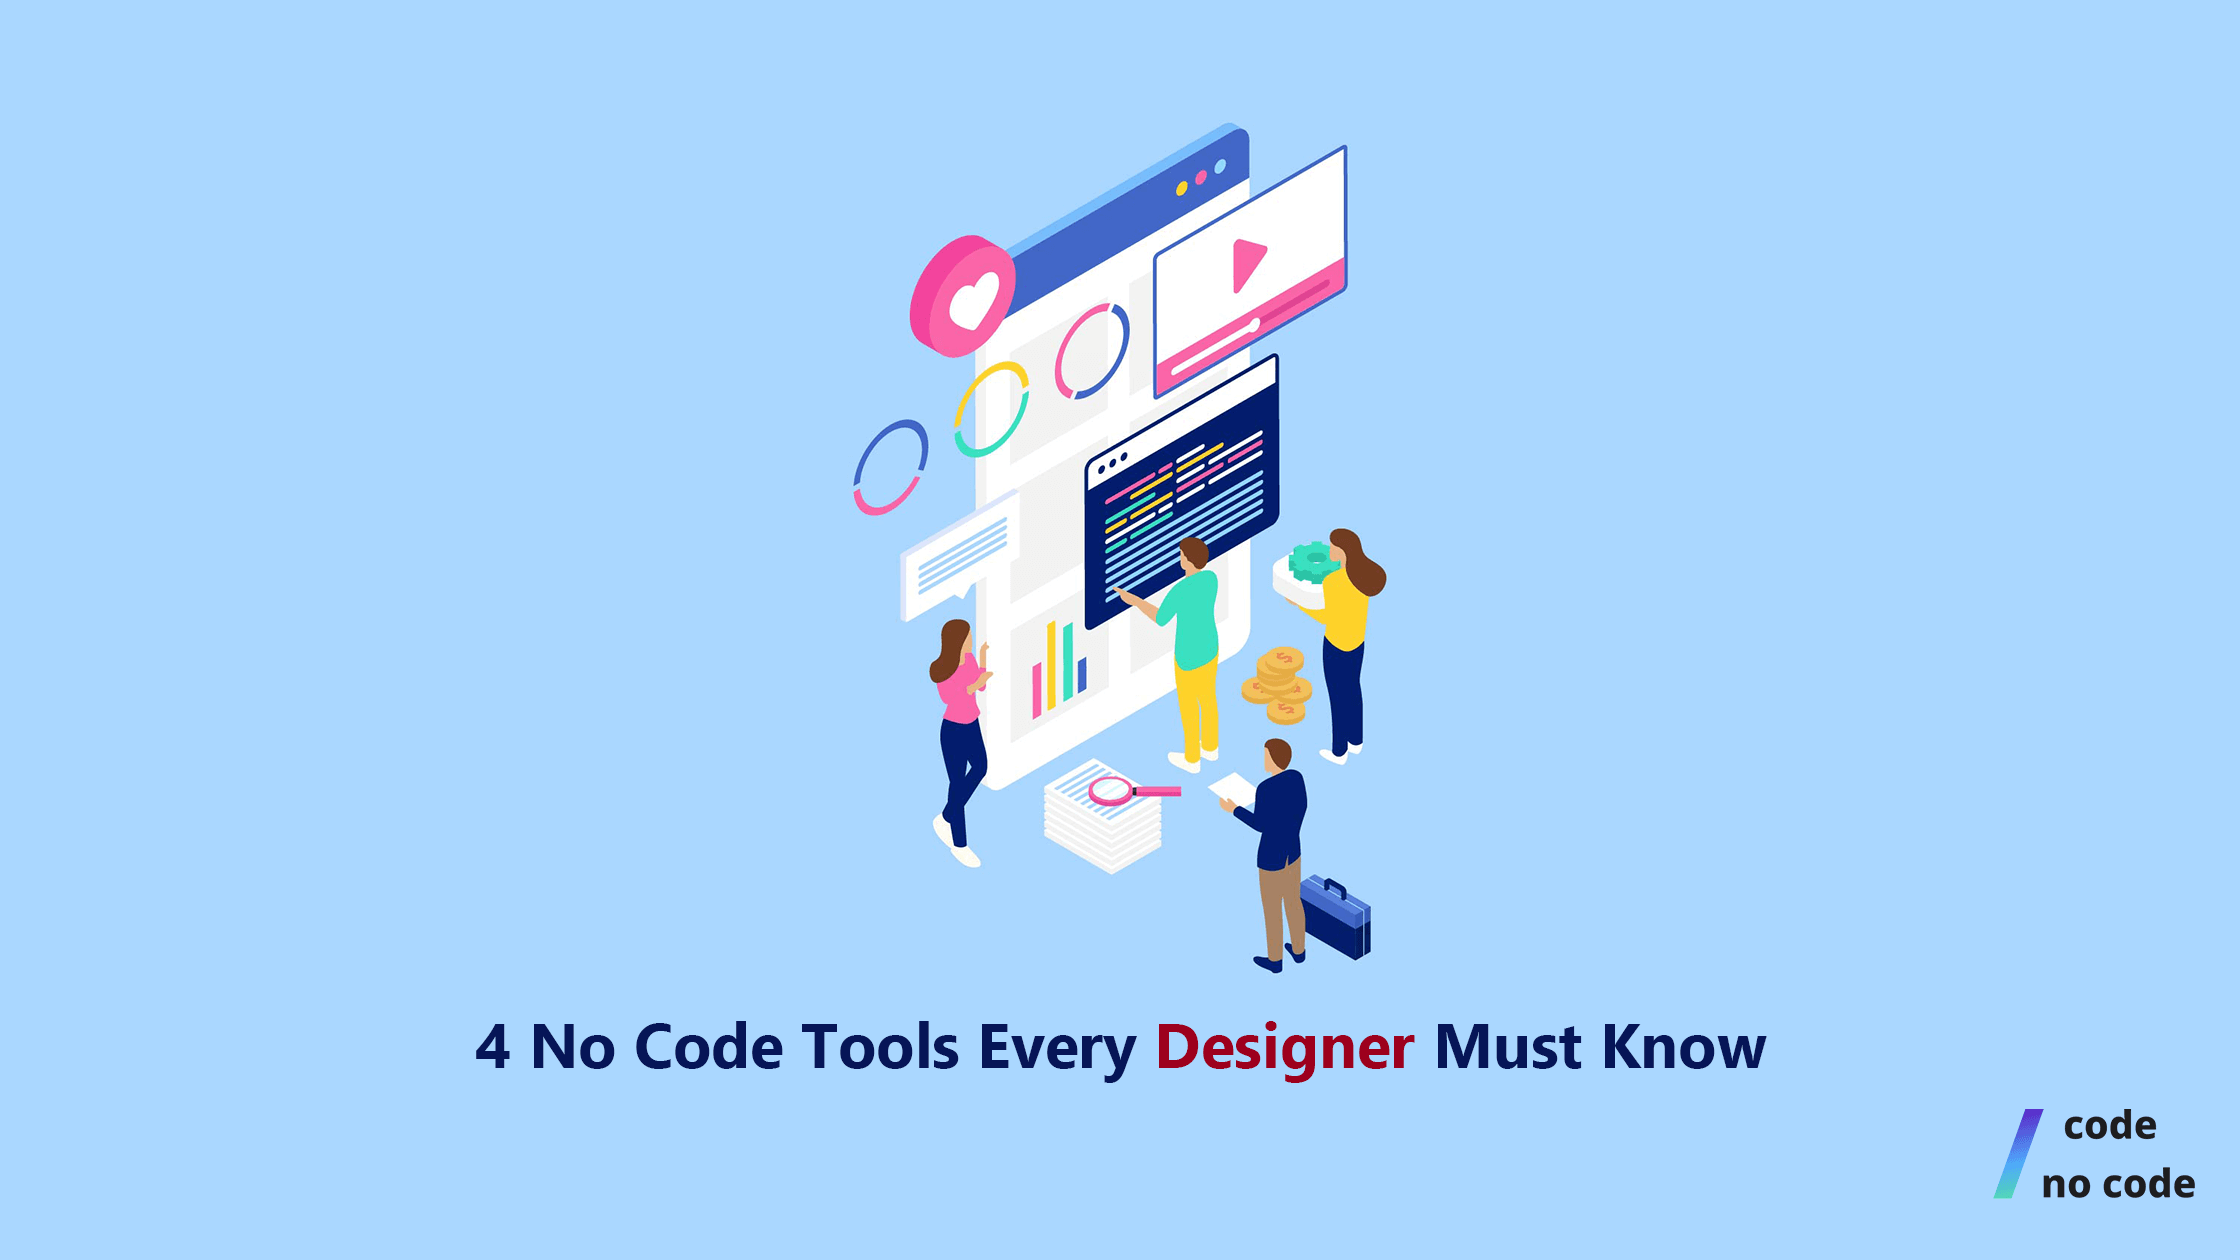 people designing software with the text '4 no code tools every designer must know'